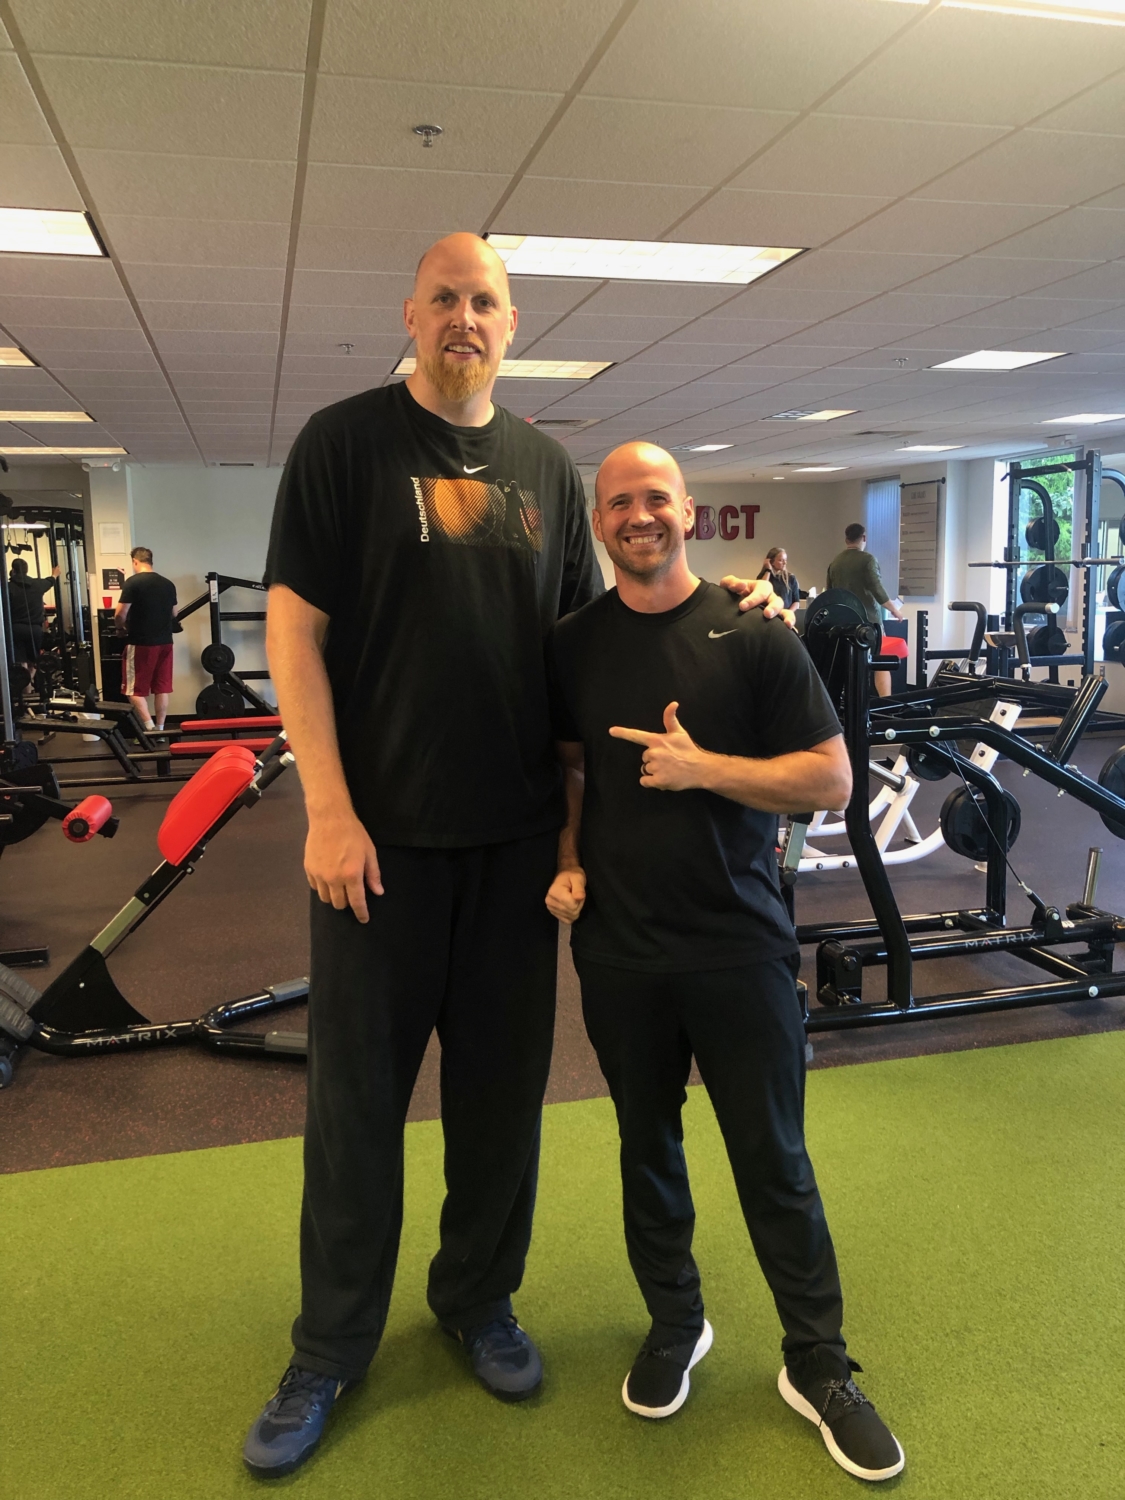 About Nick Klein, a Personal Trainers in Grand Rapids MI